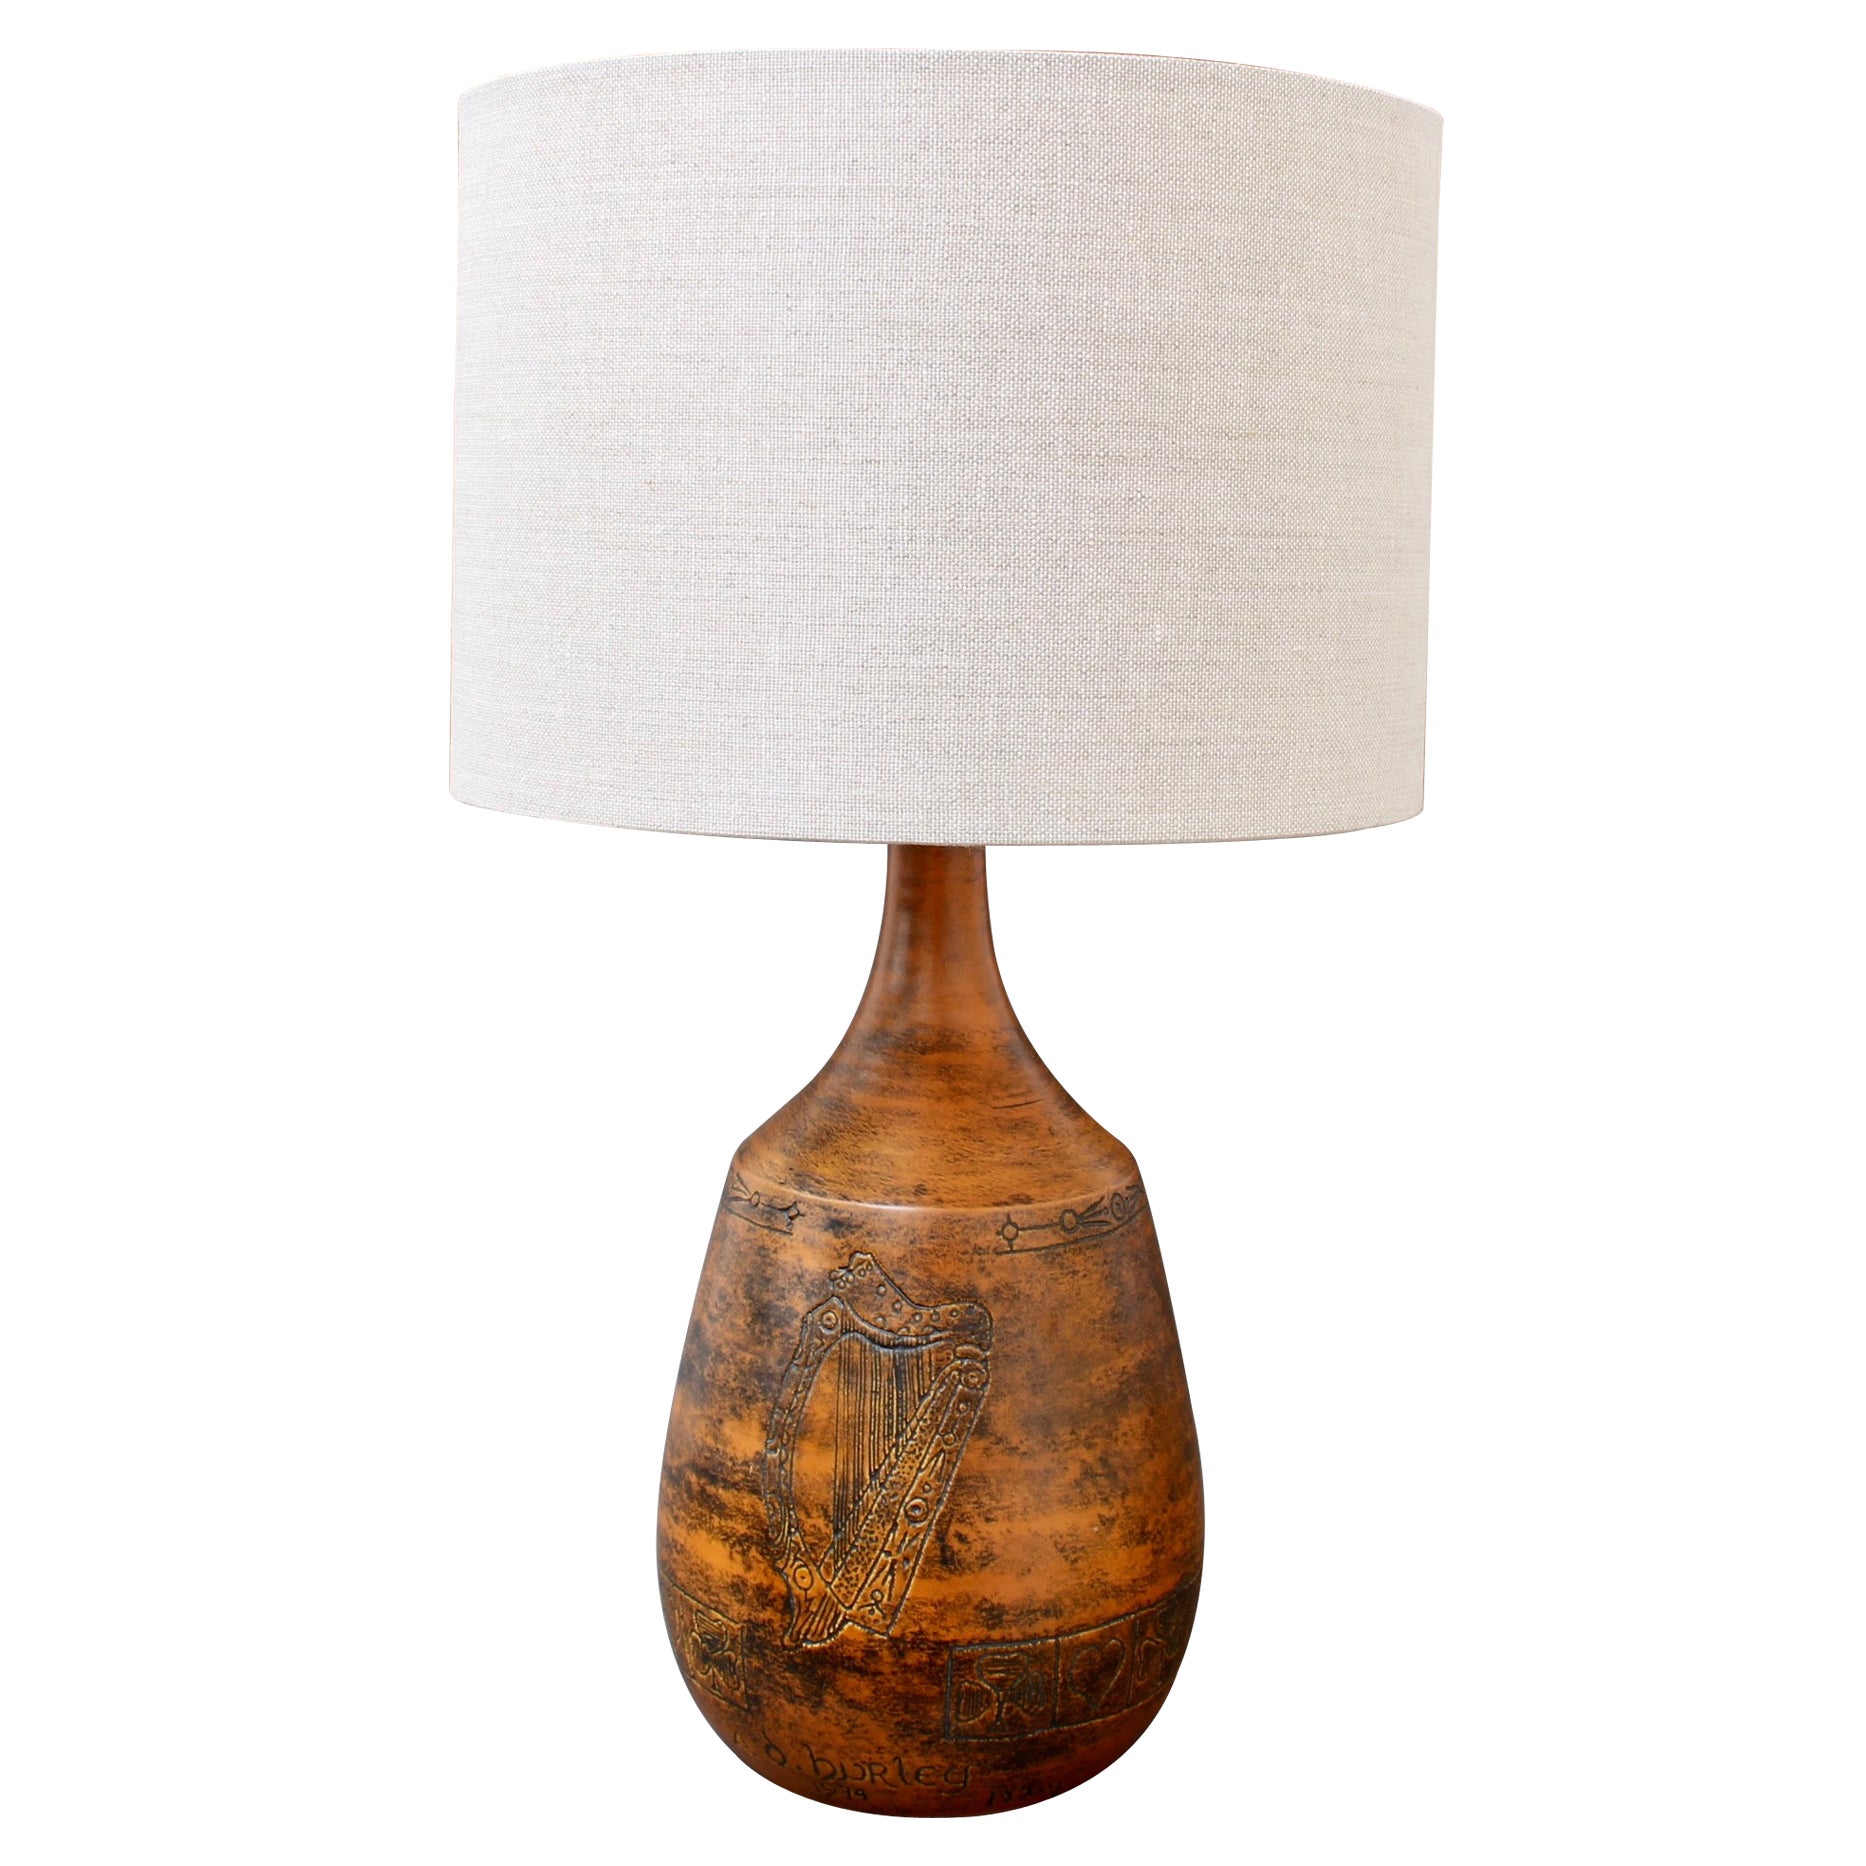 Vintage Ceramic Table Lamp by Jacques Blin '1974' For Sale